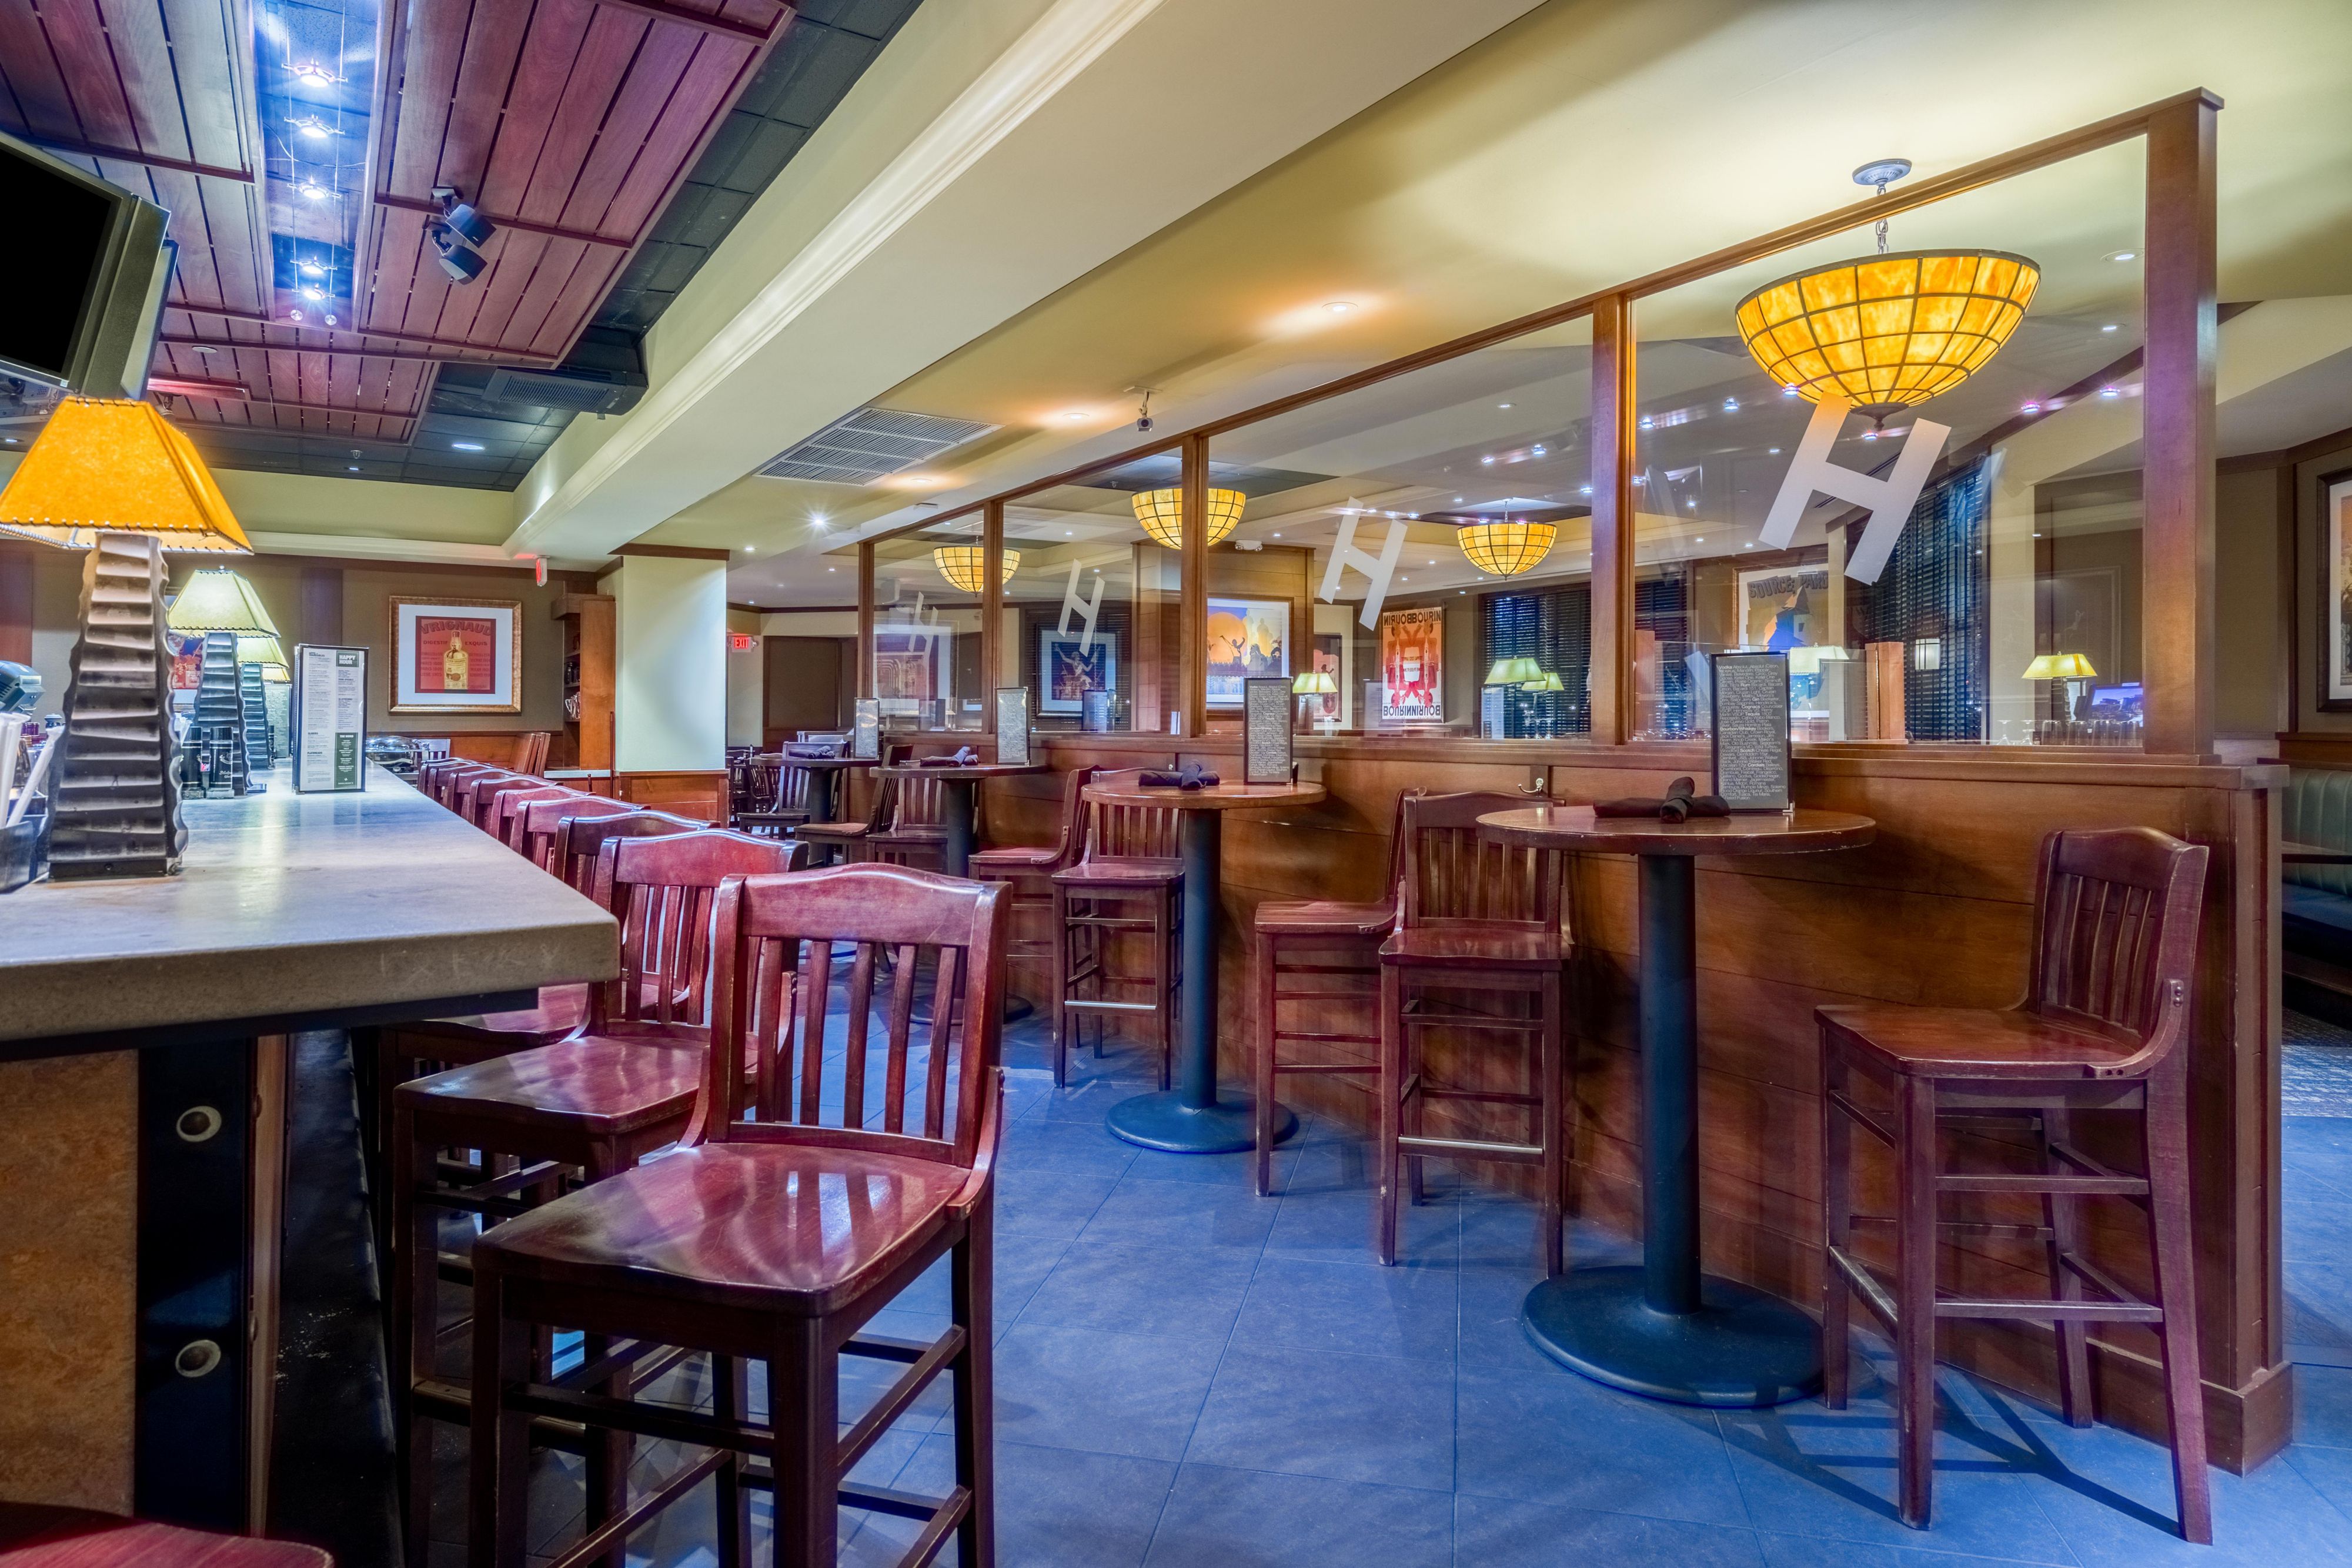 Houlihans Bar has plenty of space for your gathering after work.